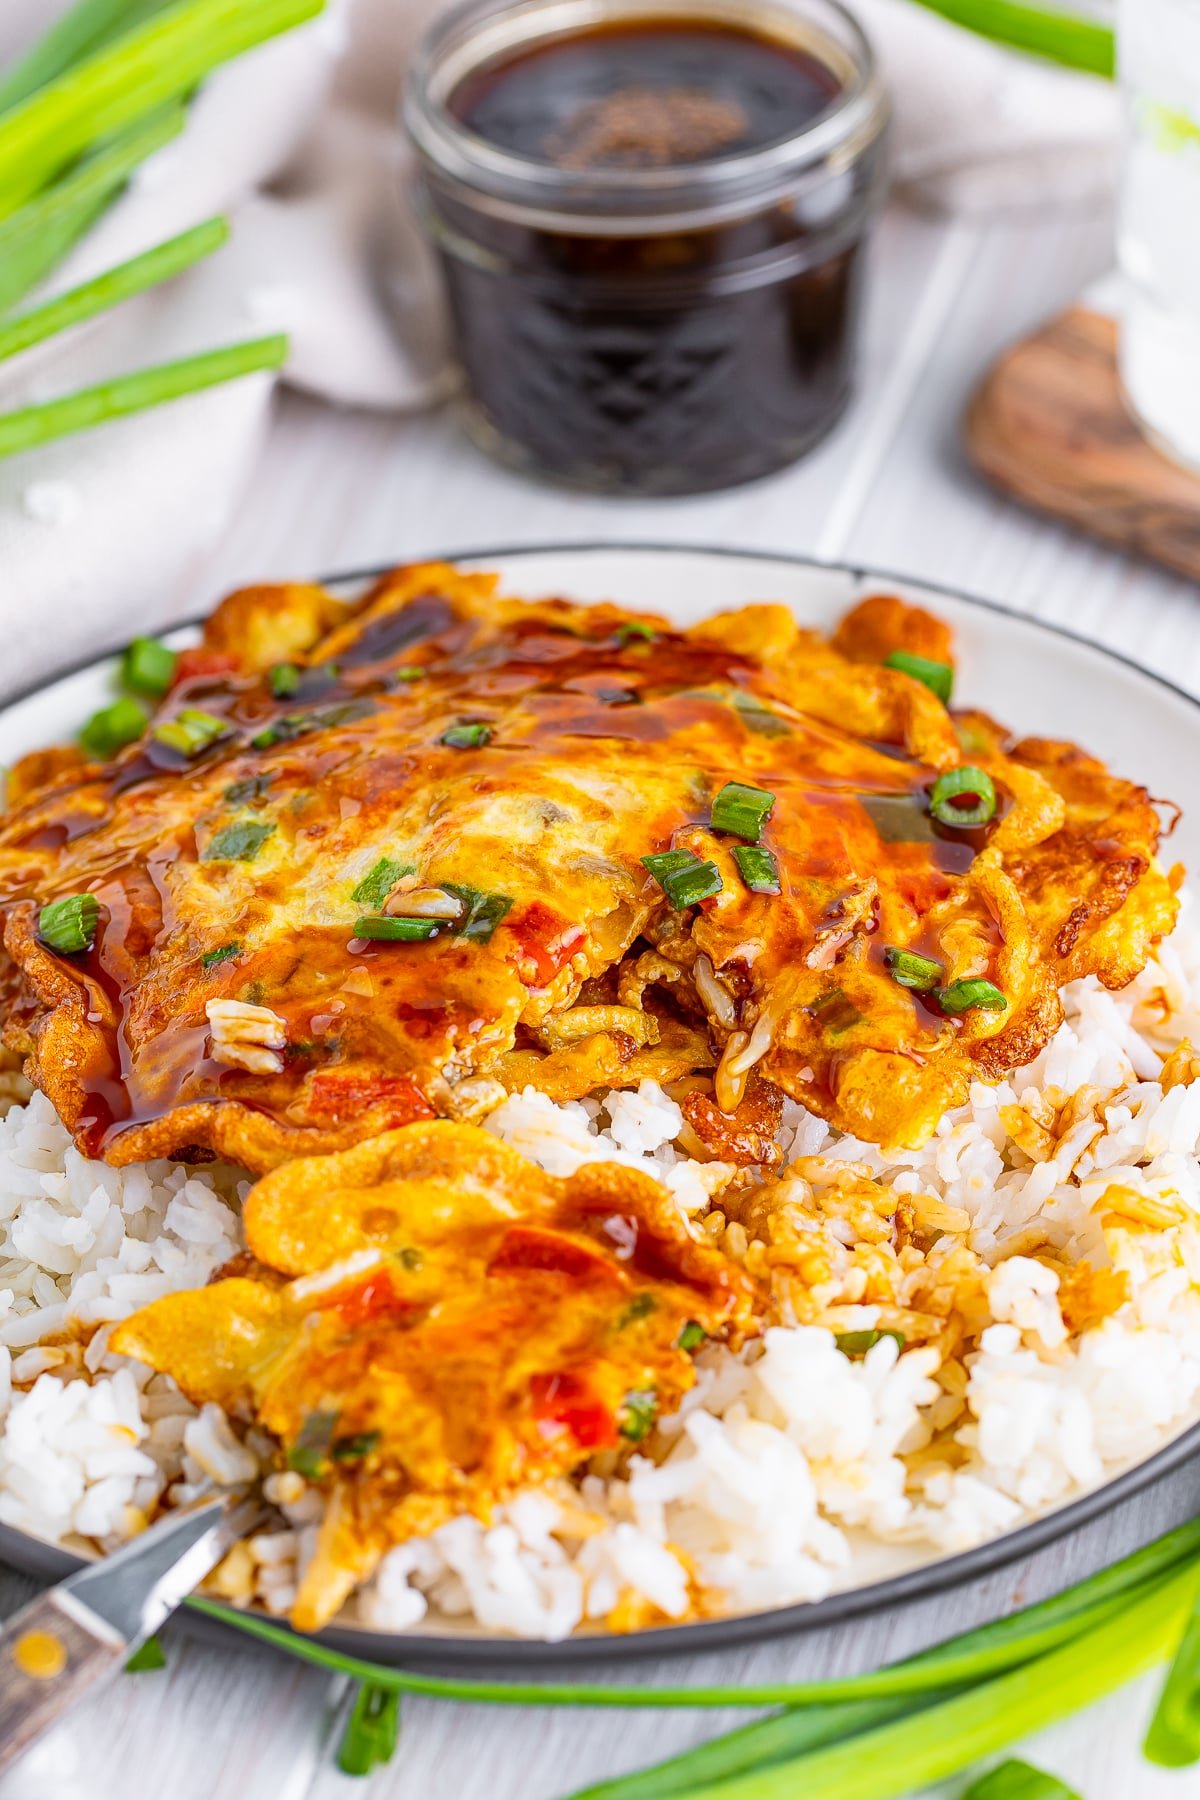 A piece of Vegetable Egg Foo Young recipe taken out of one pancake on a bed of white rice, on a white wooden tabletop, jar of sauce and scallions in the background